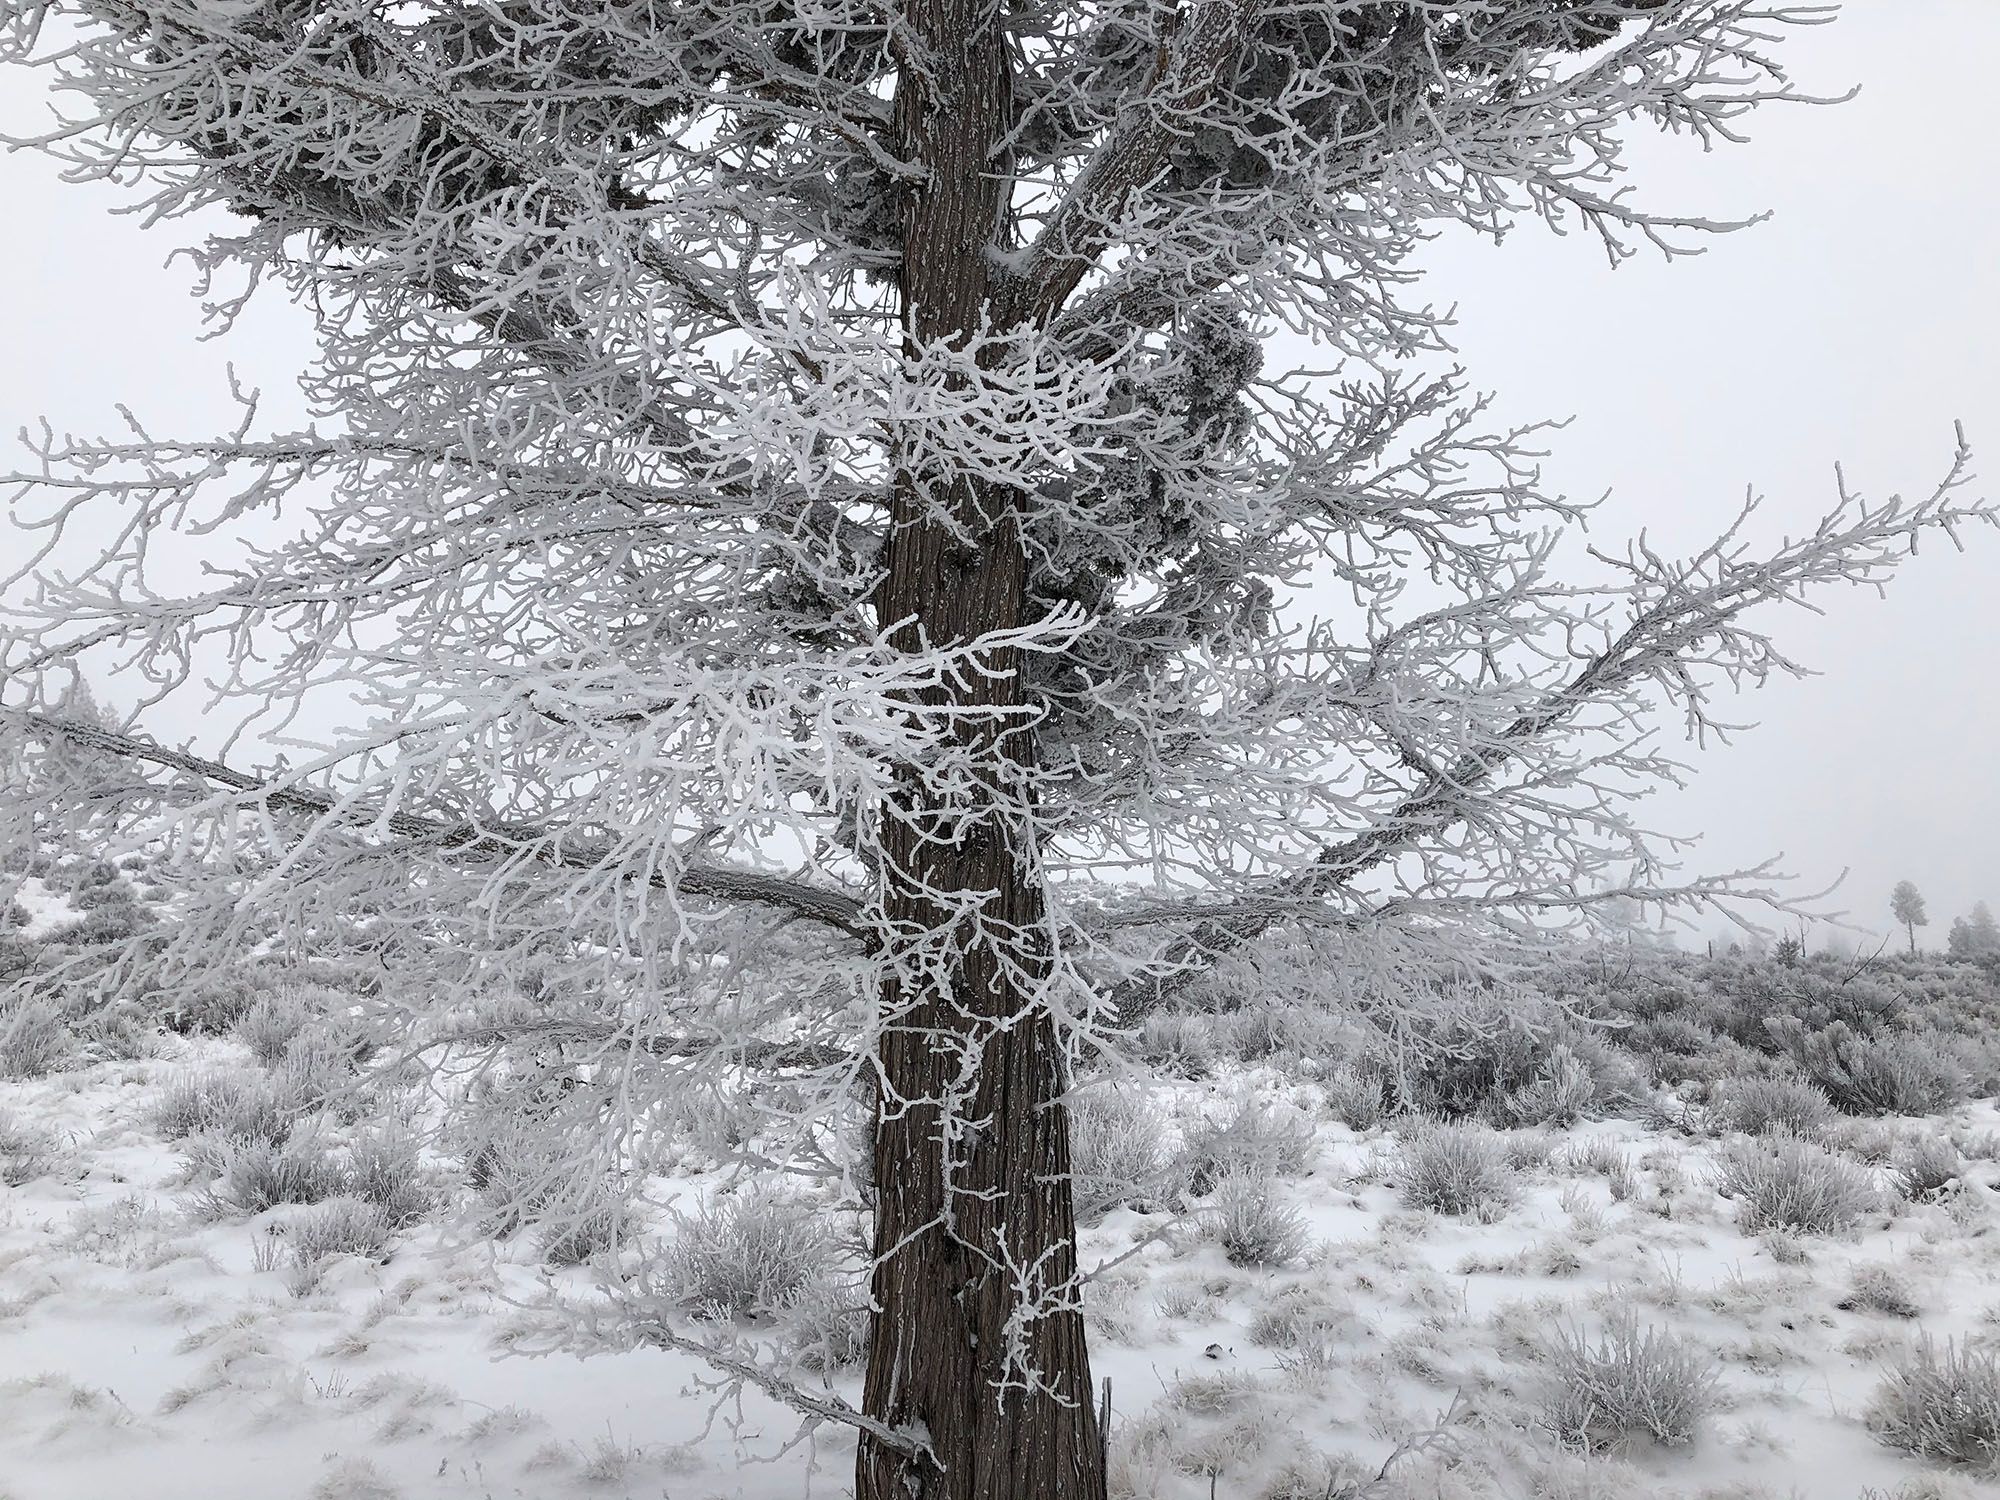 Snow and hoar frost on a ponderosa pine